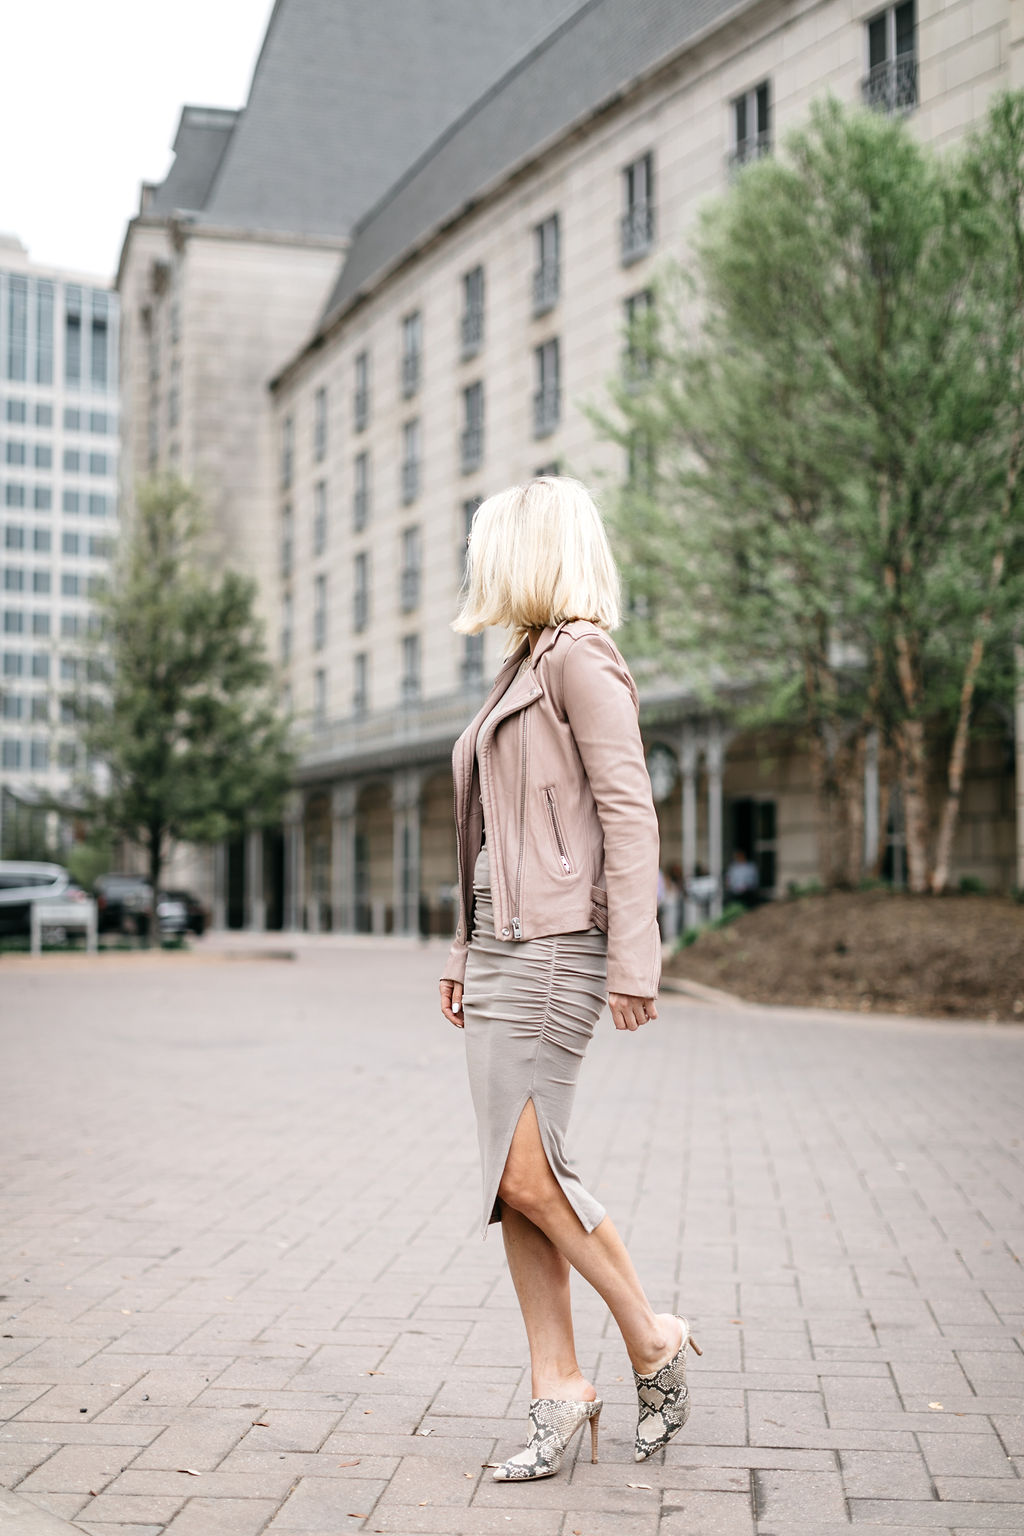 Reward Style Conference 2019, Fashion blogger over 40 Erin Busbee of BusbeeStyle.com wearing a fitted cropped long sleeve top and fitted midi skirt by Made LA from Revolve in Dallas, Texas